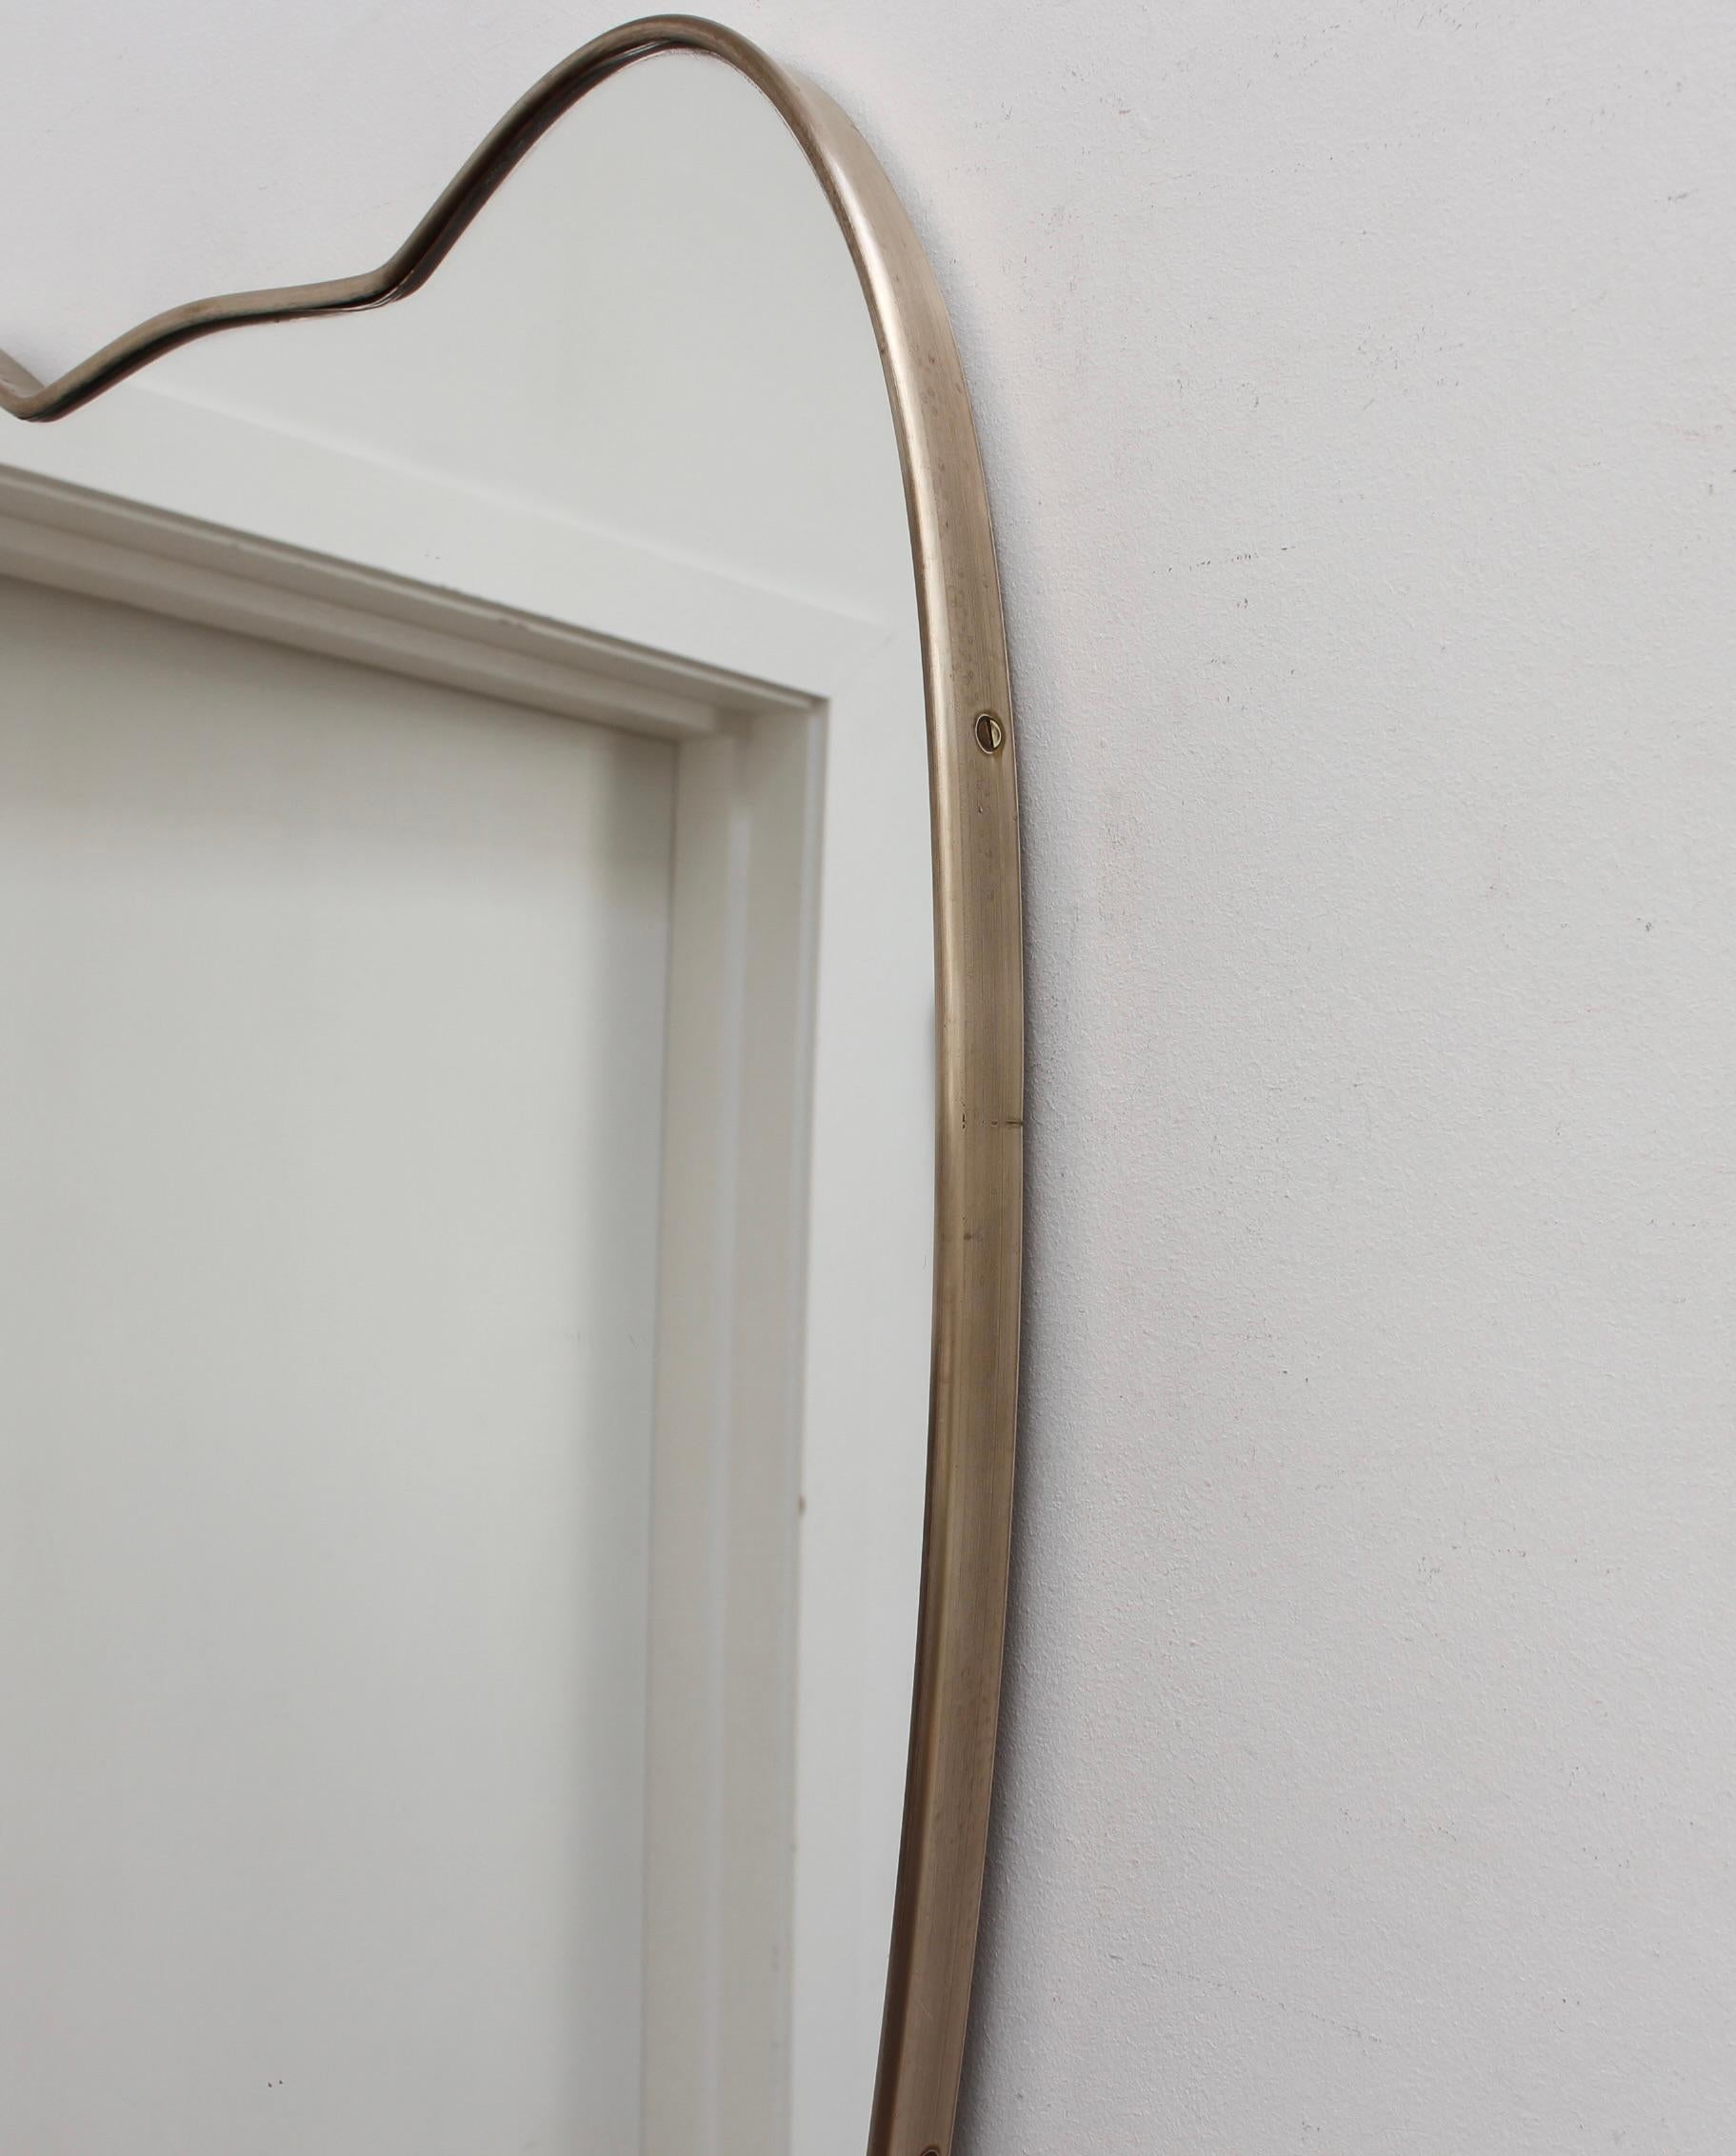 Midcentury Italian Wall Mirror with Brass Frame, 'circa 1950s' For Sale 4